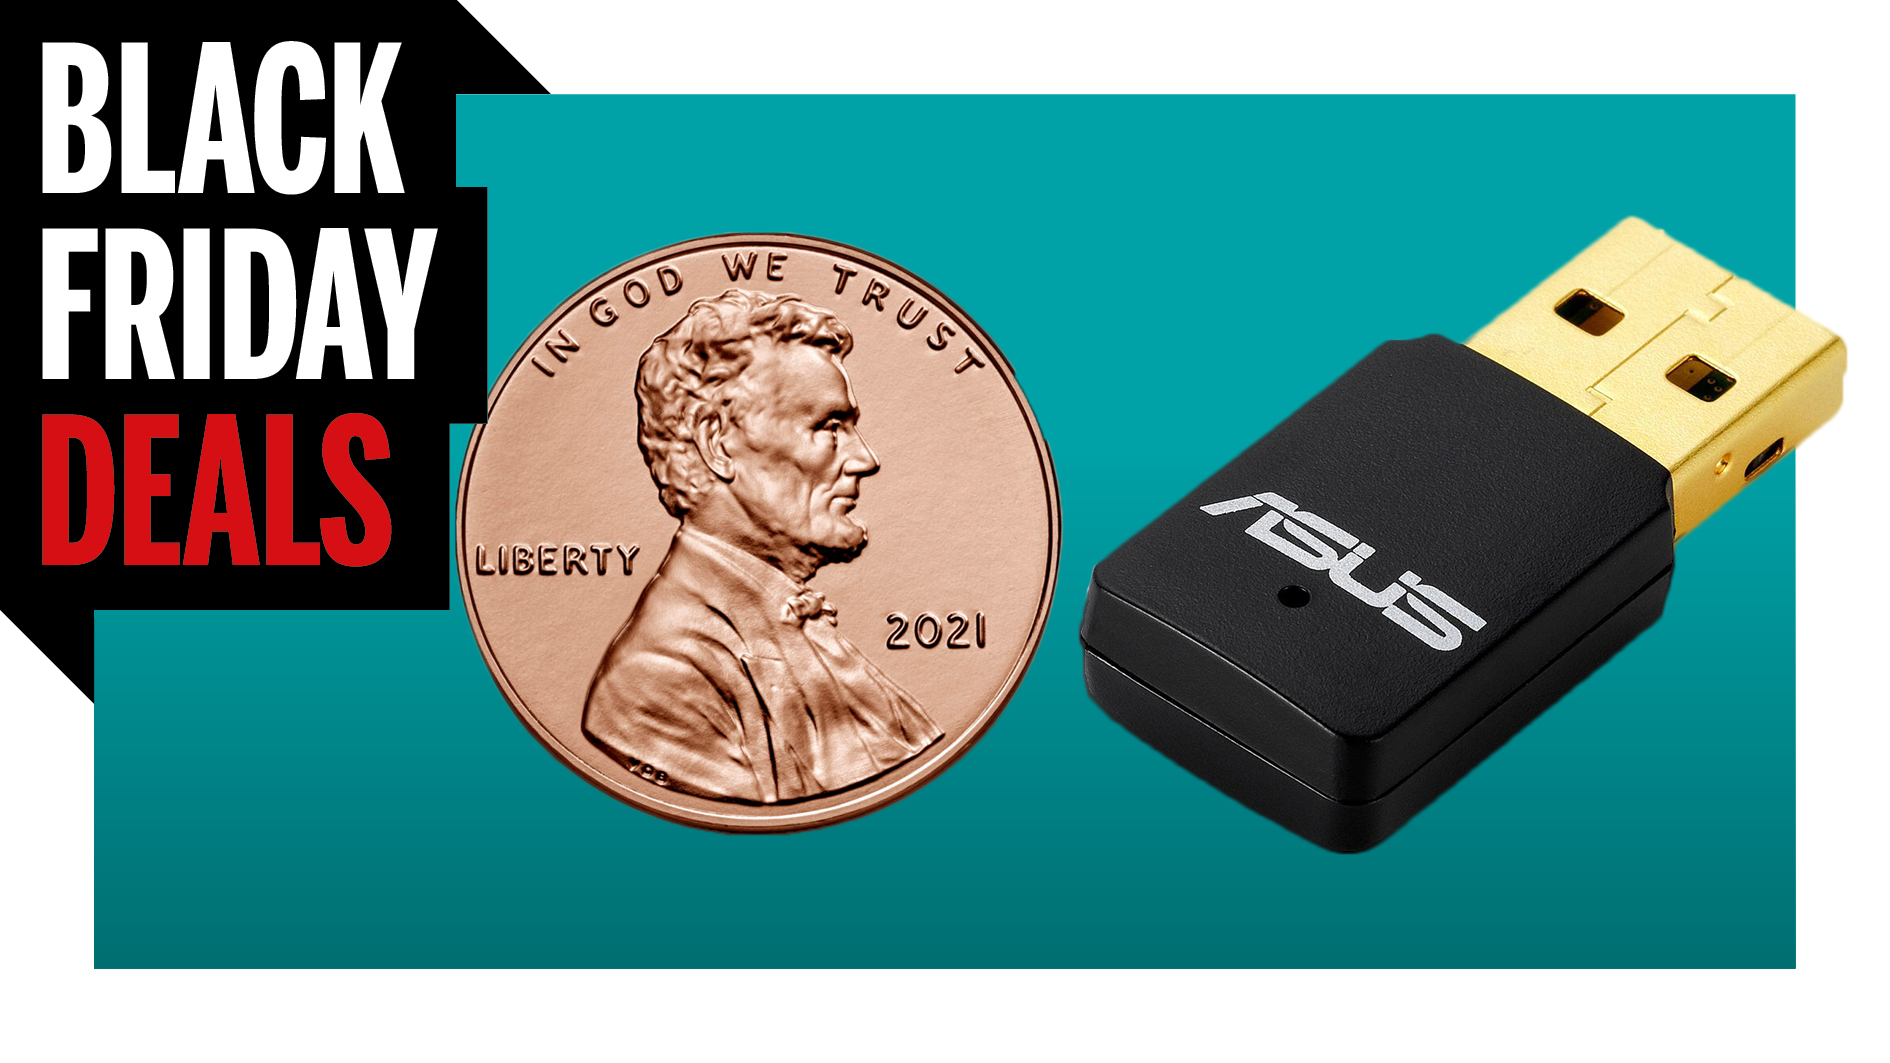  This USB dongle costs a single penny, if you just want to participate in Black Friday 